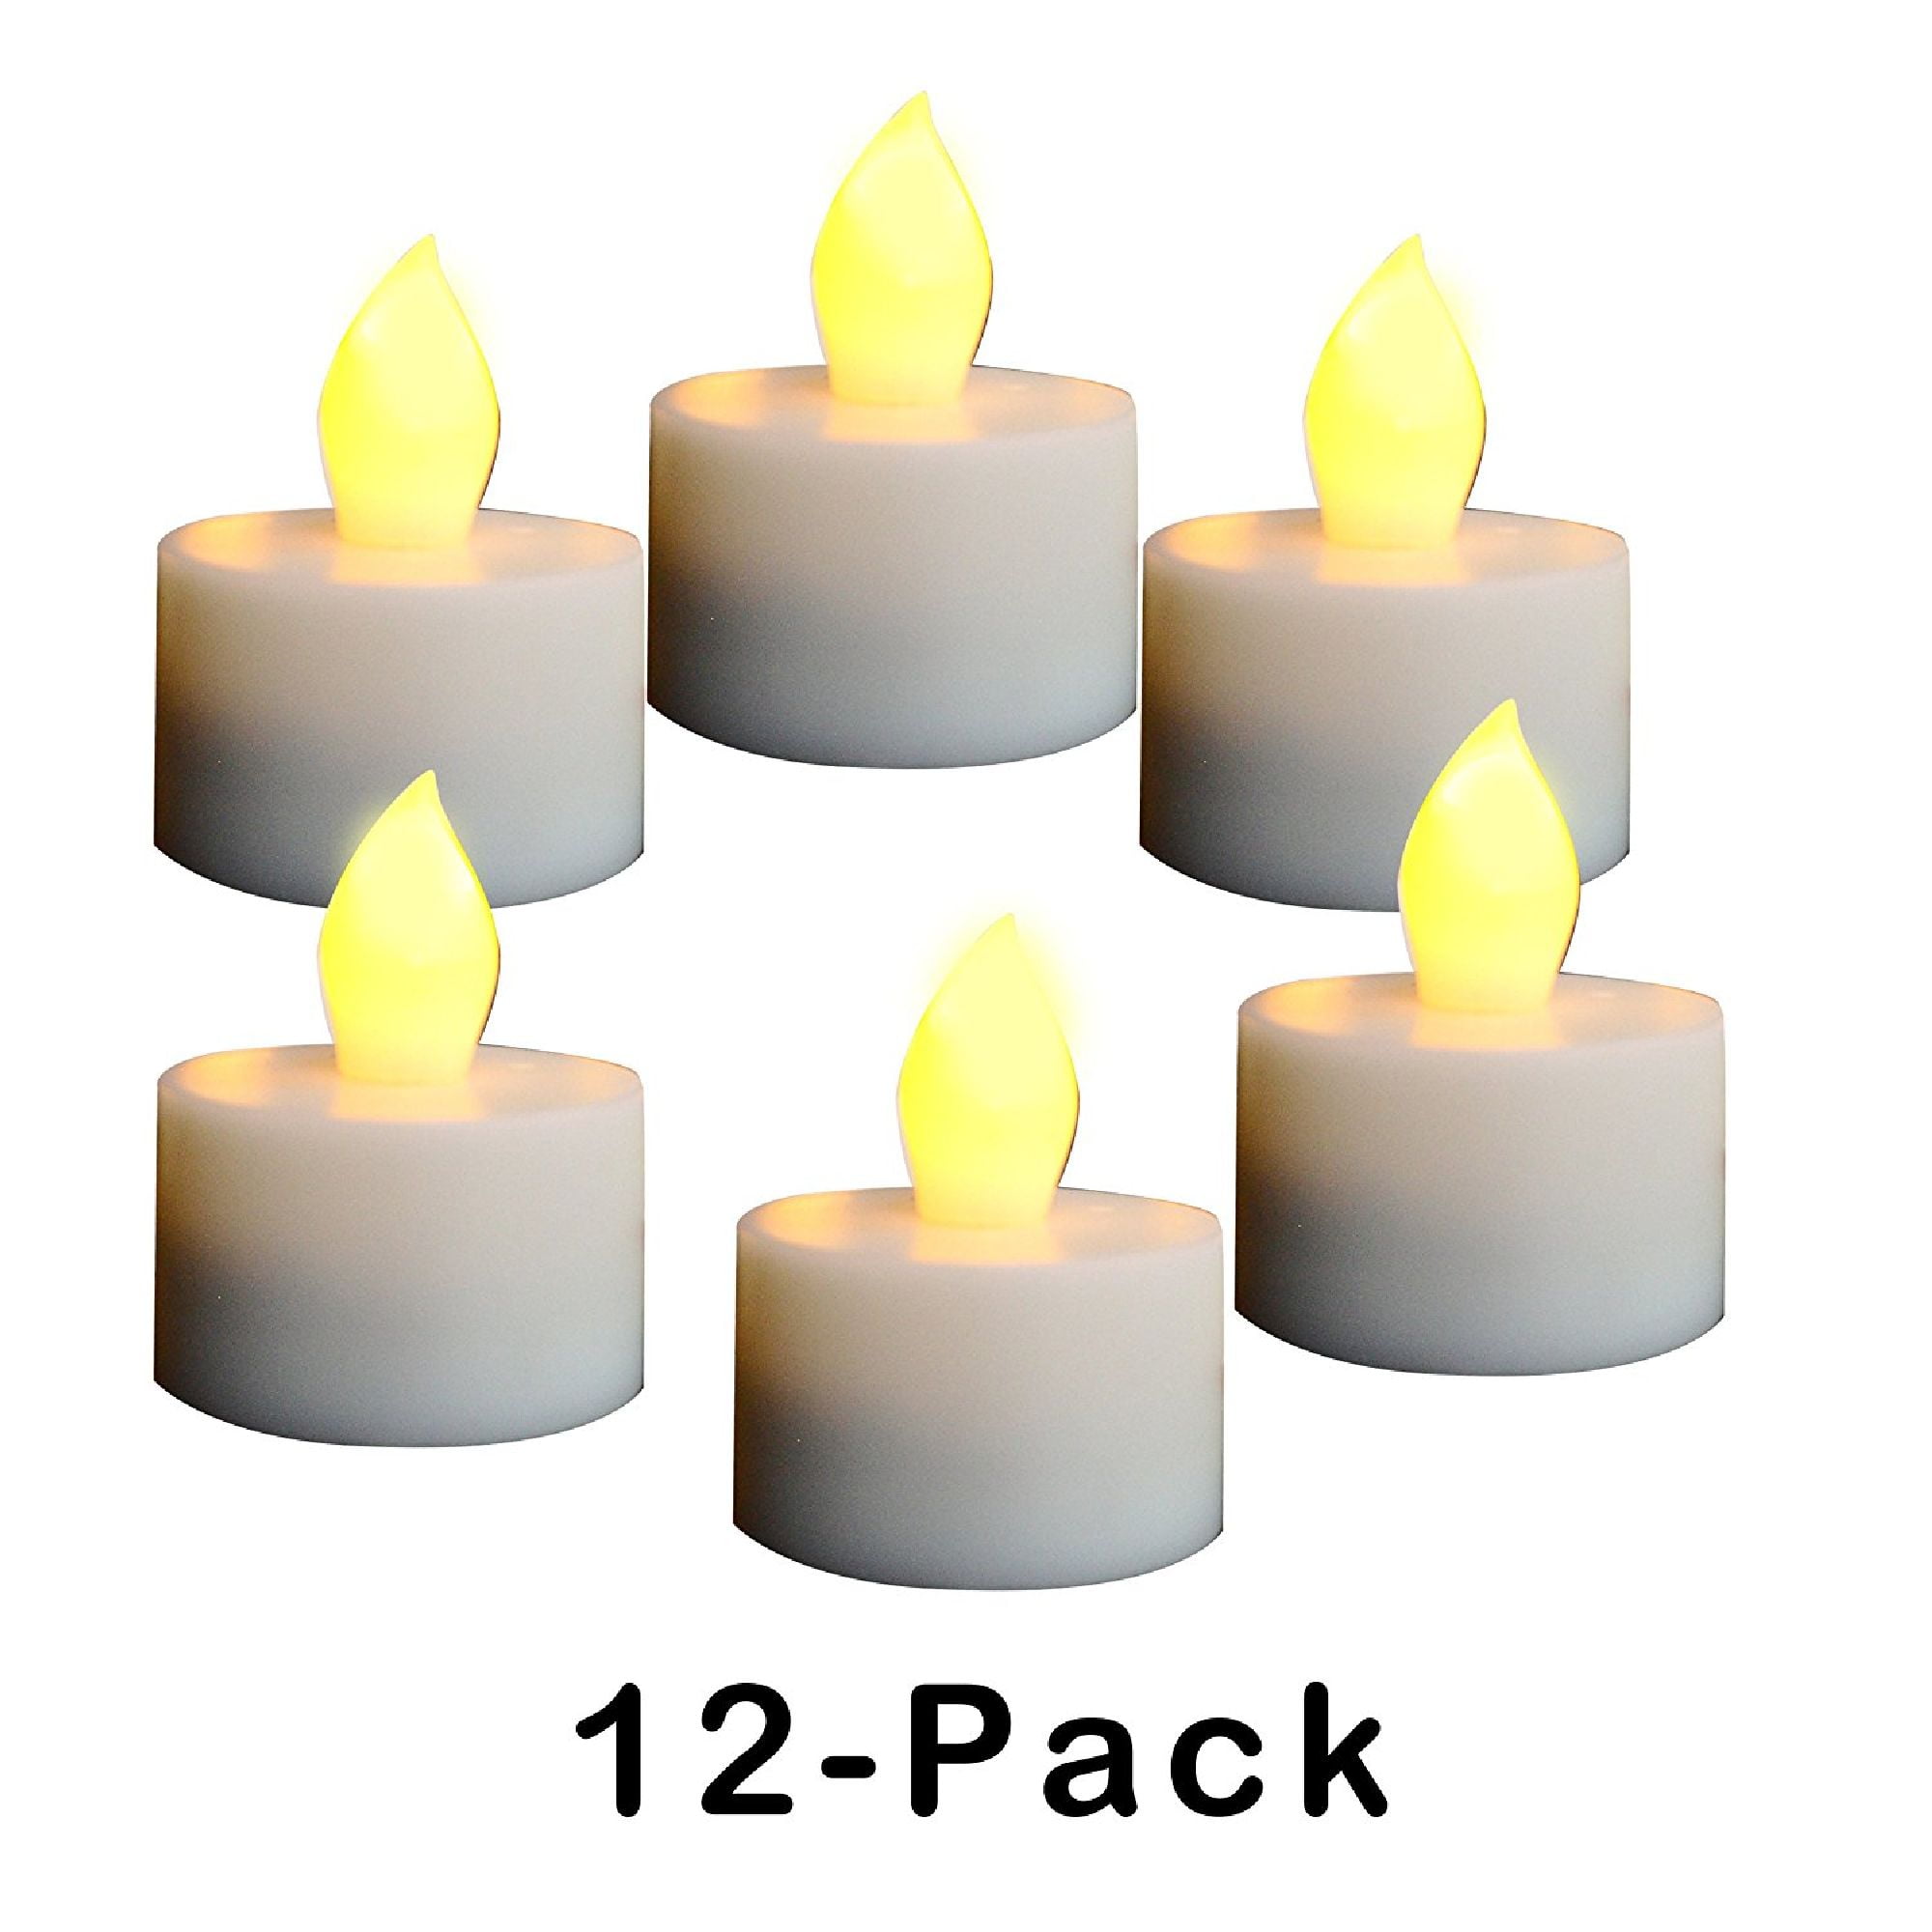 Professional Waterproof Rechargeable Tea Light Candles Set of 12